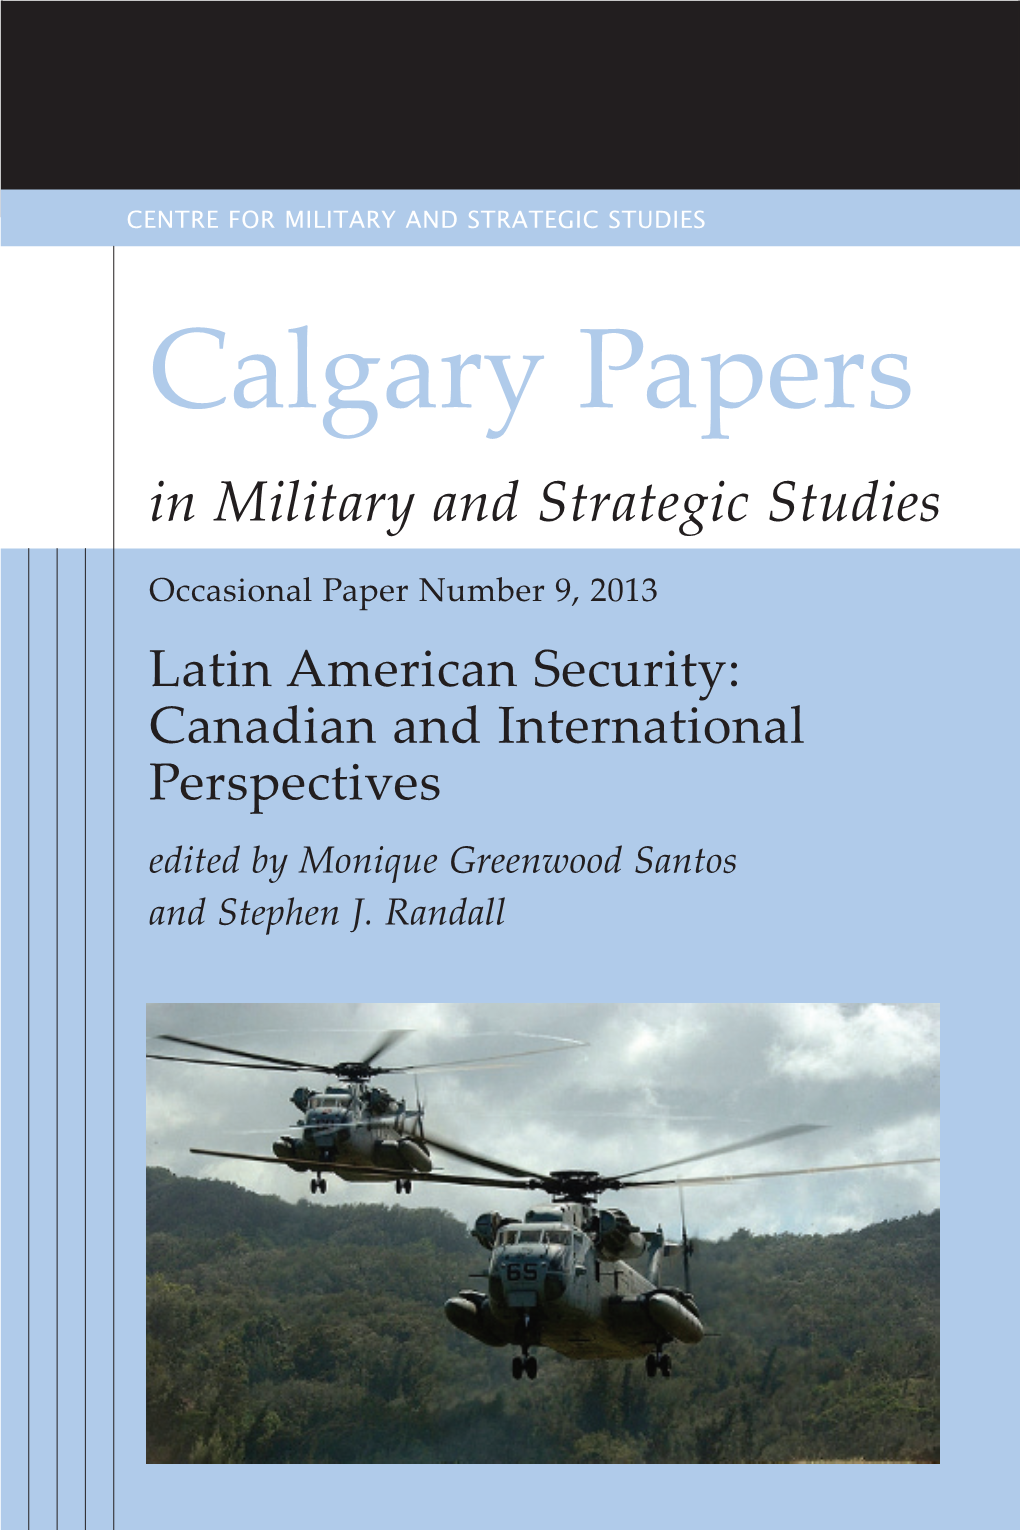 Latin American Security: Canadian and International Perspectives Edited by Monique Greenwood Santos and Stephen J